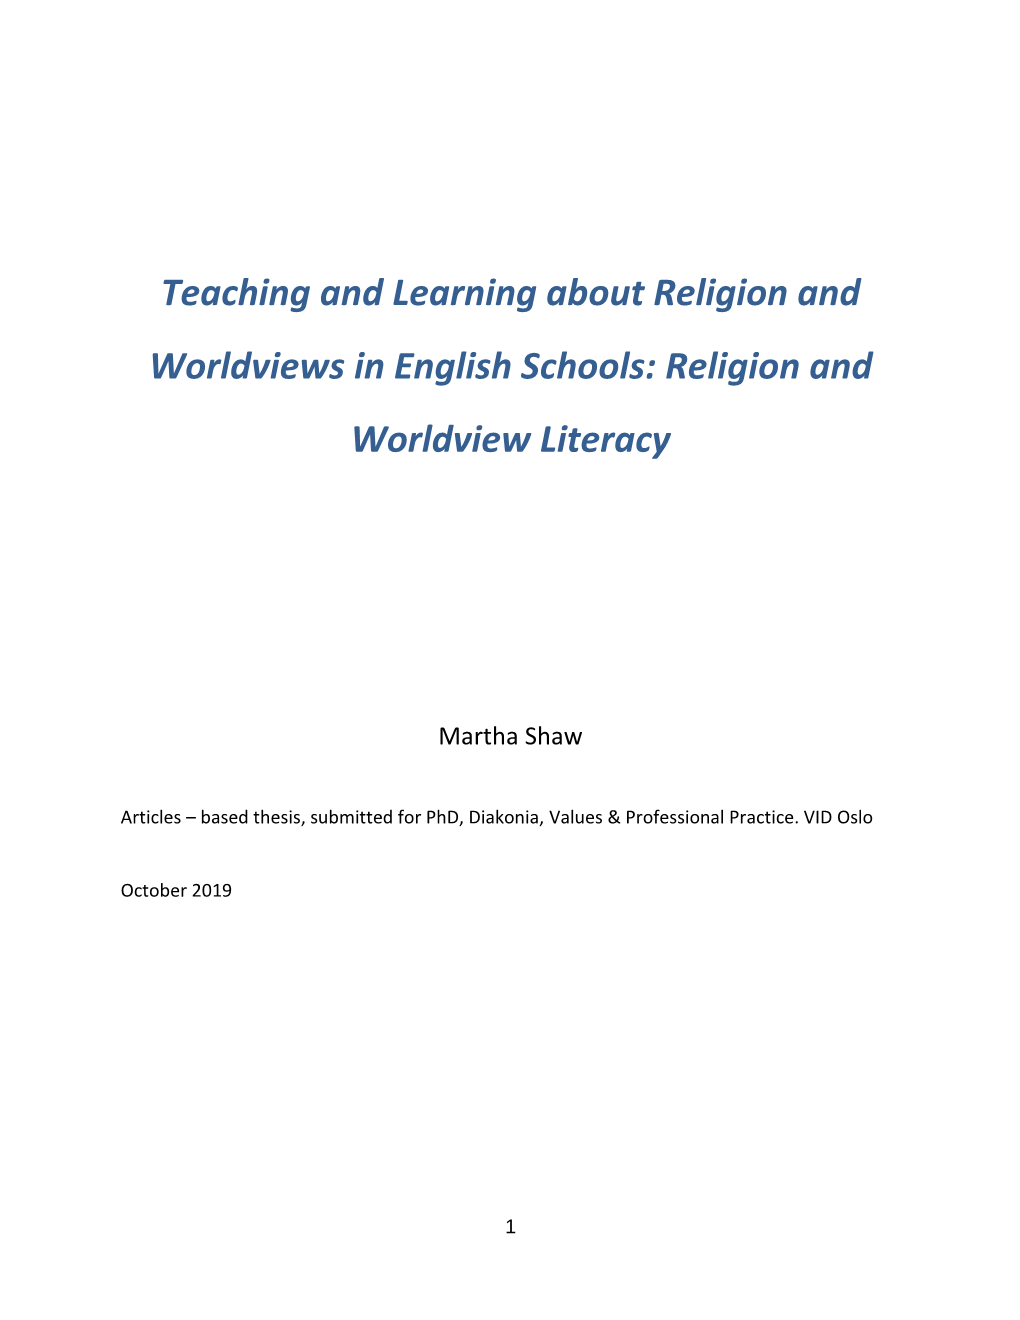 Teaching and Learning About Religion and Worldviews in English Schools: Religion and Worldview Literacy